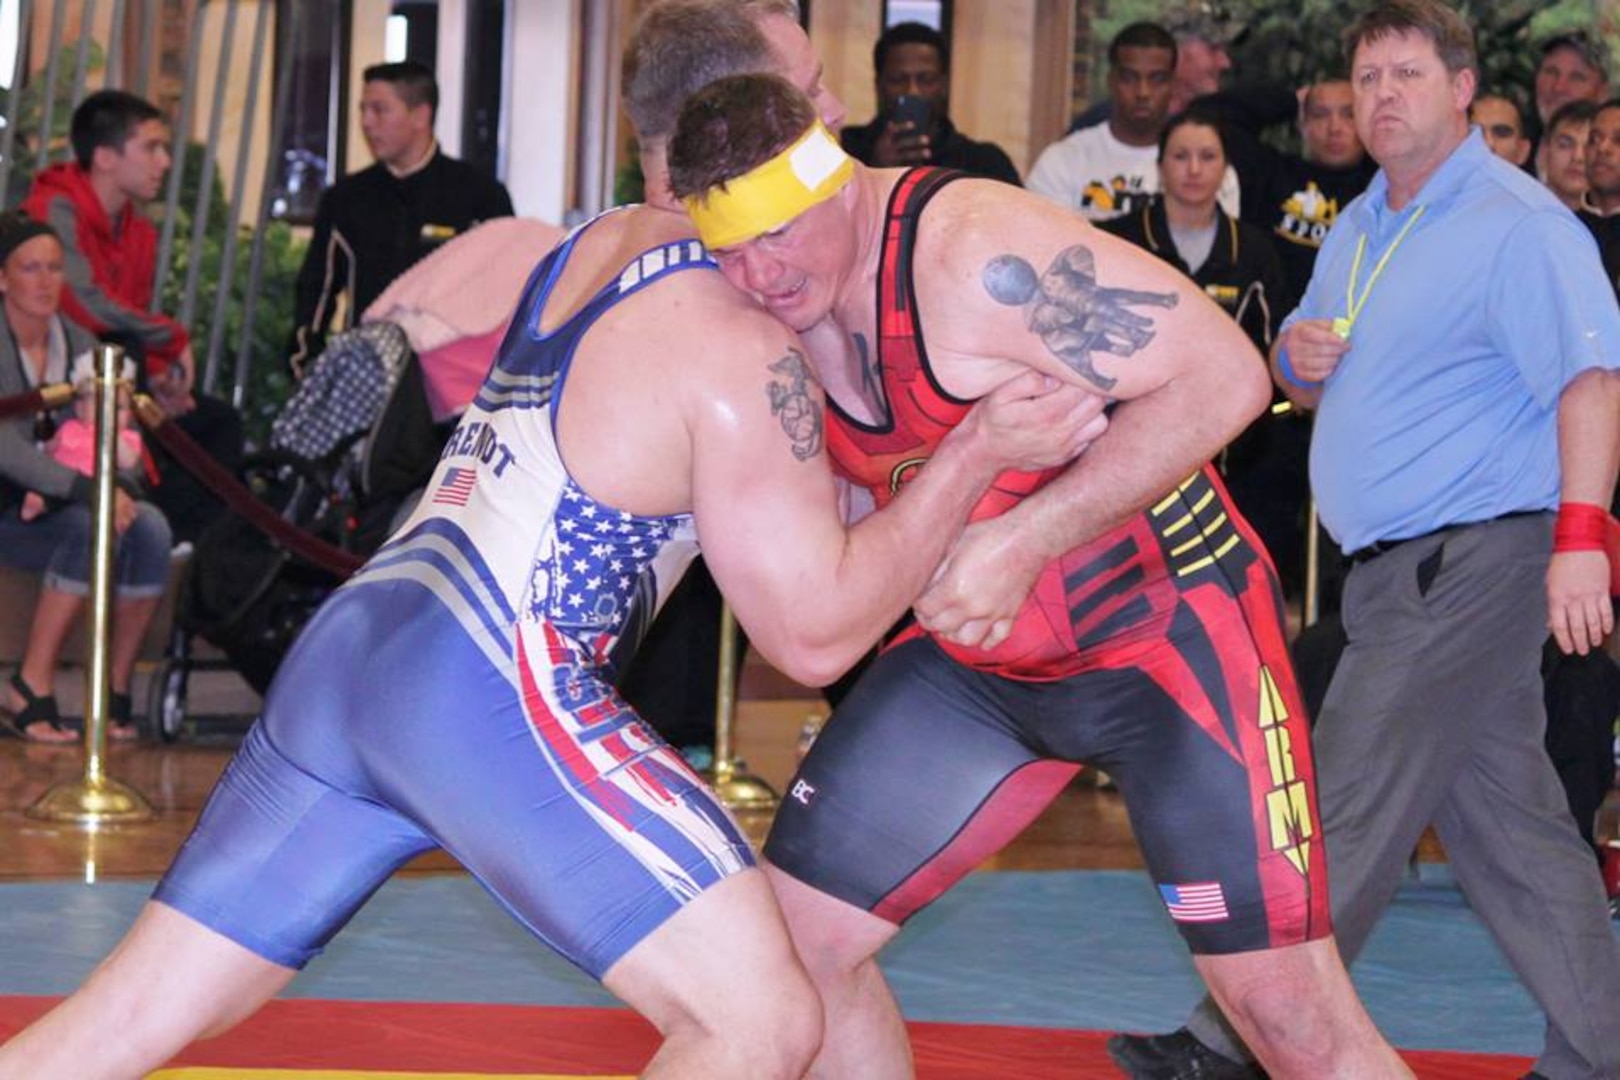 Marine Staff Sgt. David Arendt from Camp Lejeune, N.C. wins Armed Forces Greco Roman Gold in the 130 kg weight class.